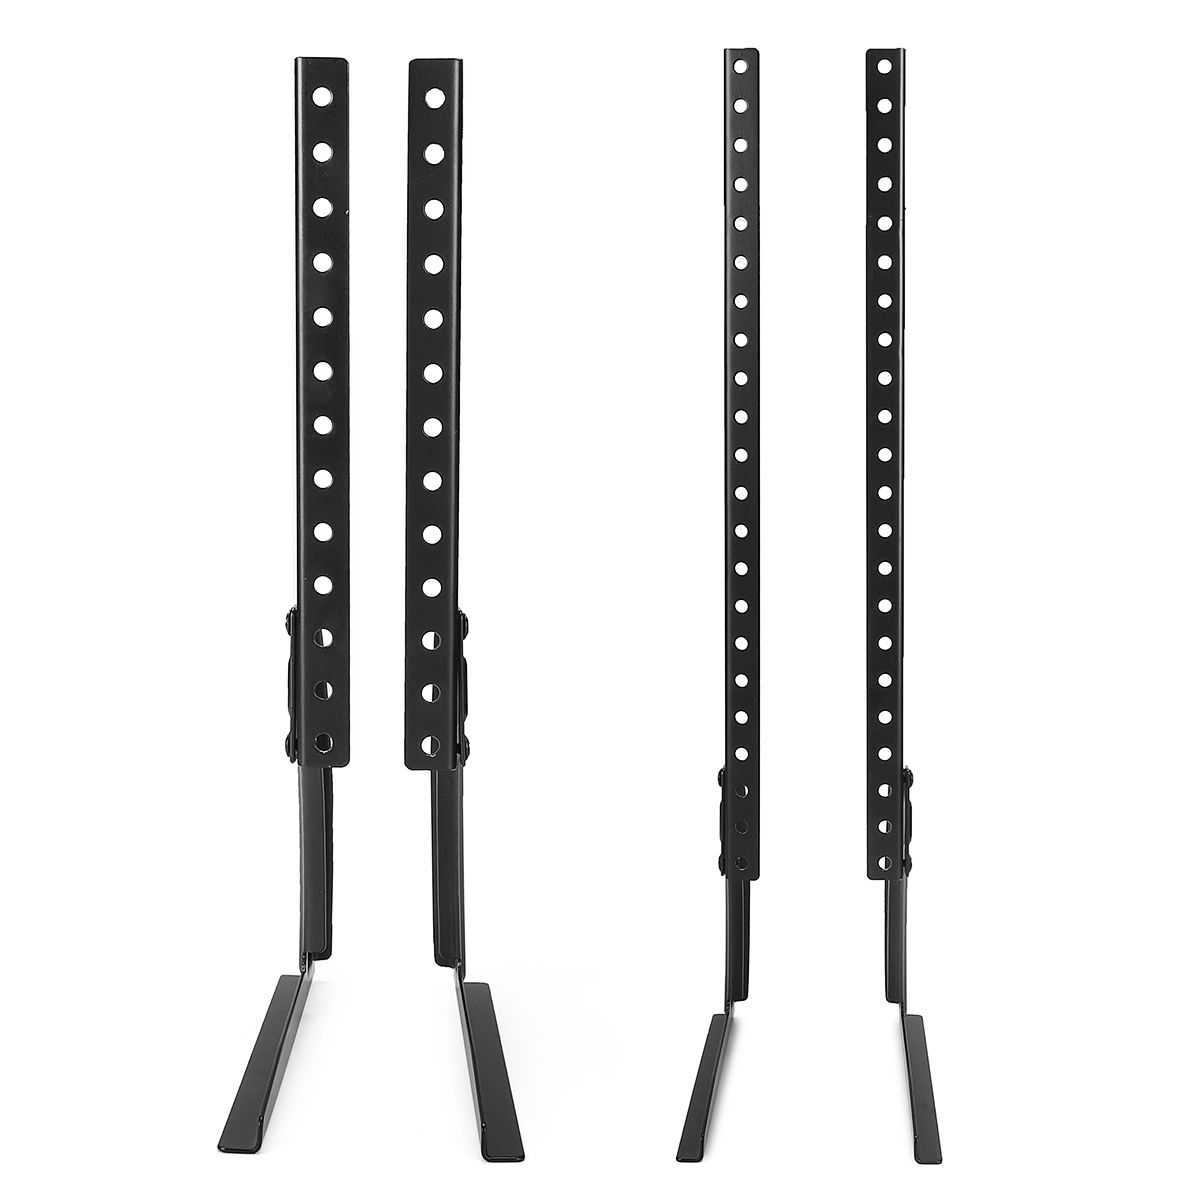 Universal-Table-Top-TV-Stand-Legs-for-LED-LCD-Plasma-Flat-Screen-TV-26-65inch-1299704